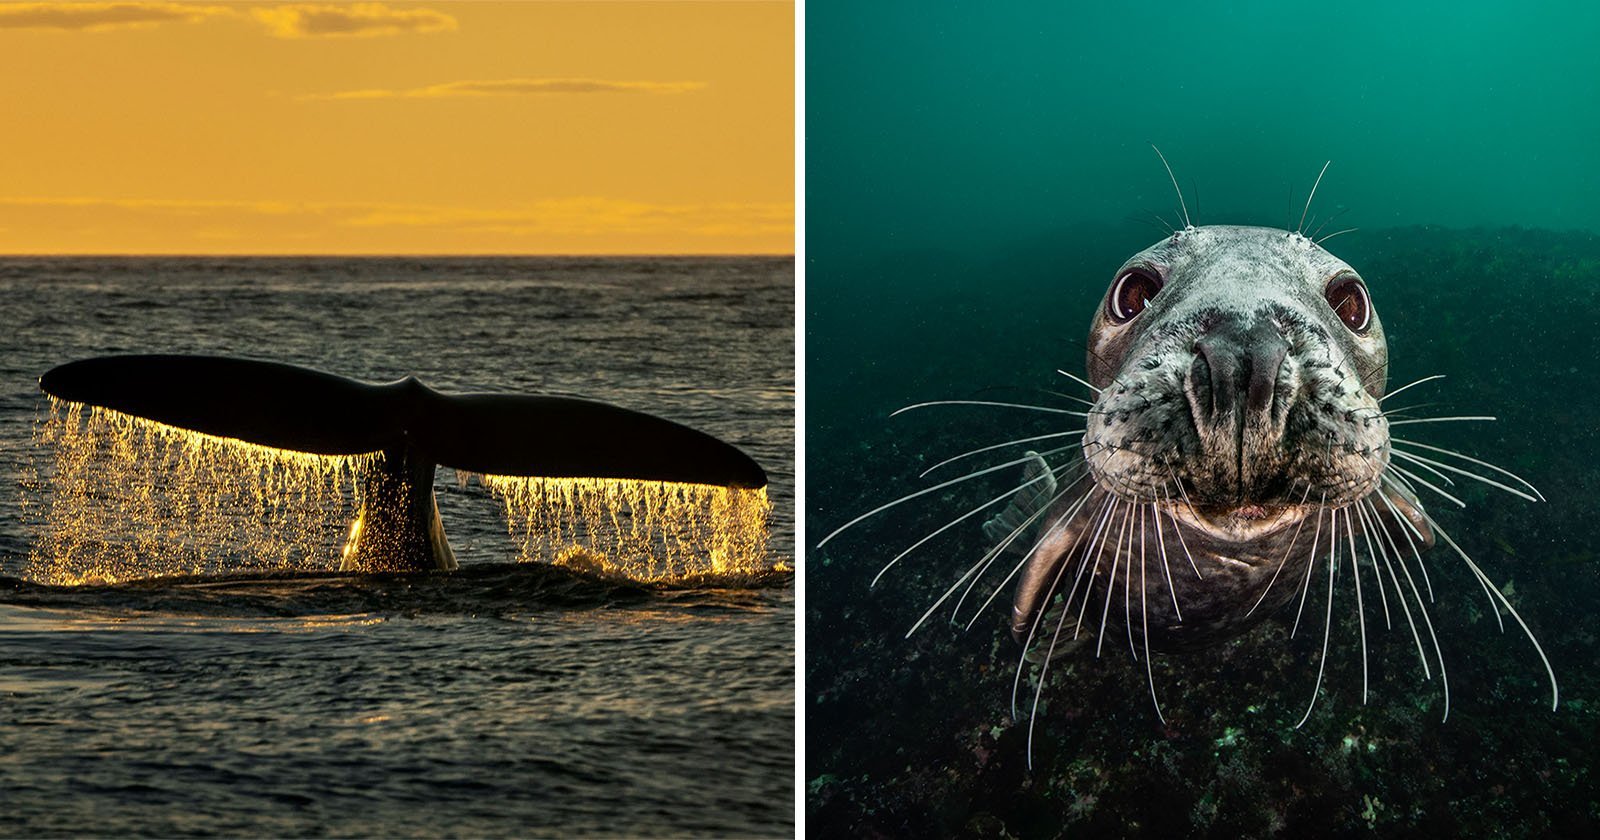 A Photographer’s Mission to Save the Ocean Begins With Powerful Images